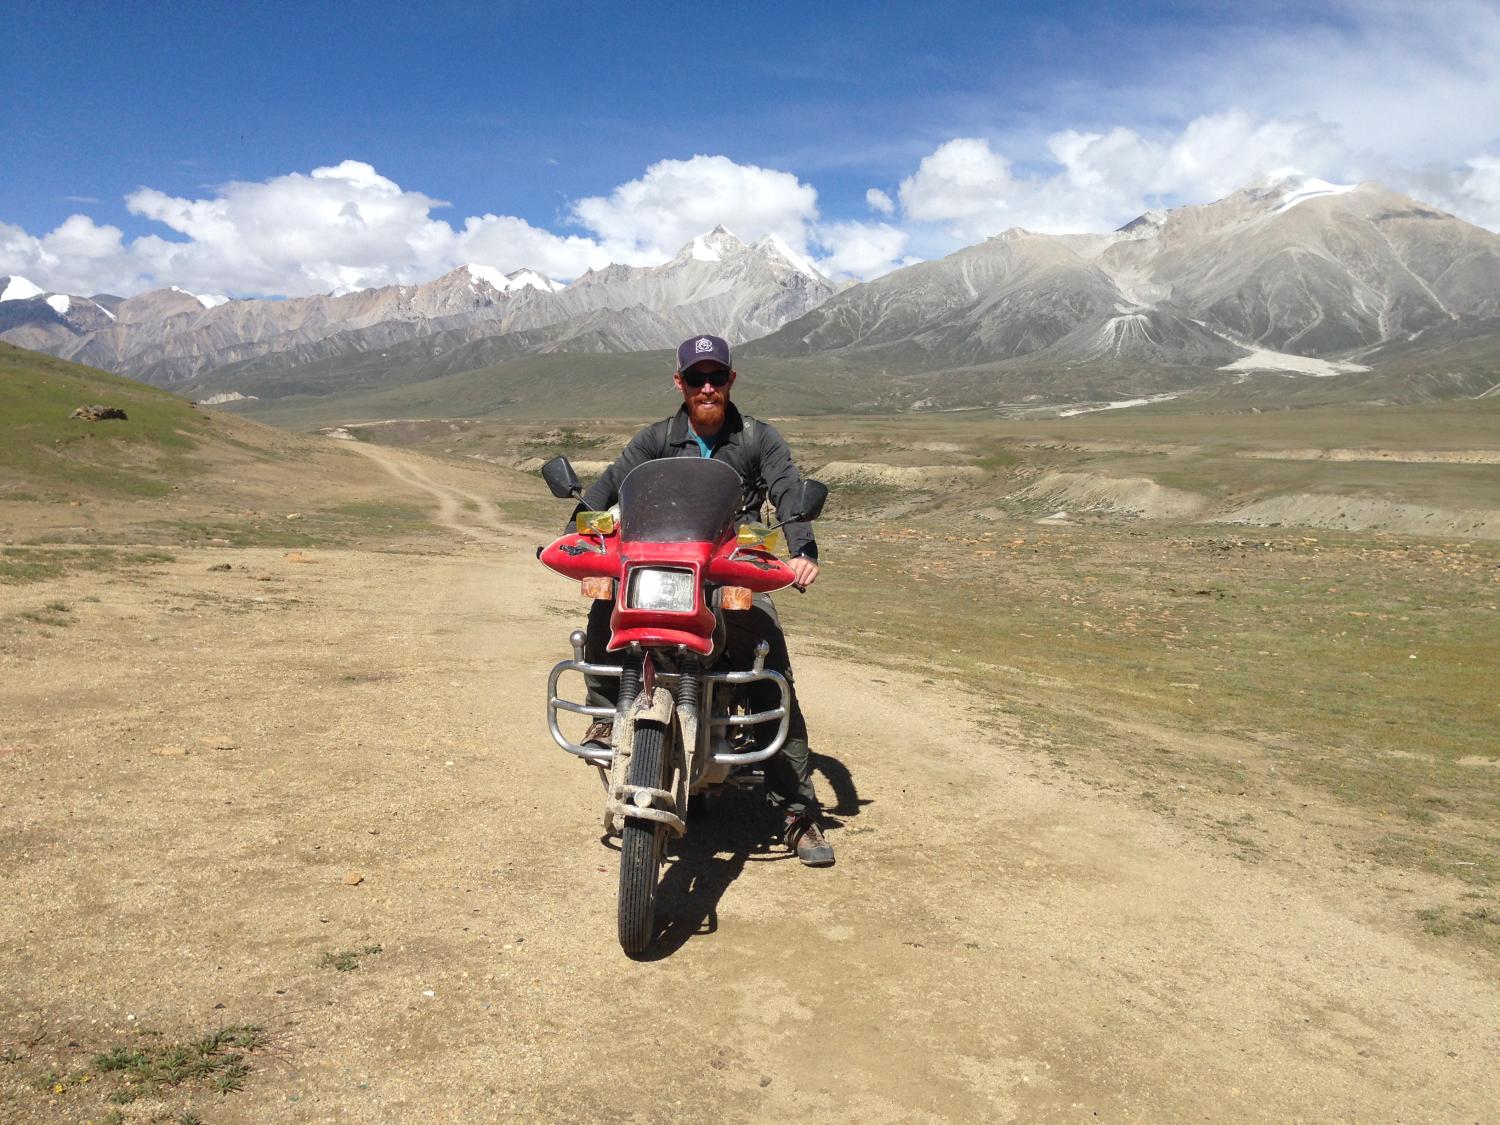 I used motorcycles to reach all three Nepal-China border posts. Here I’m sitting on my friend’s Chinese motorcycle atop the Kora-la